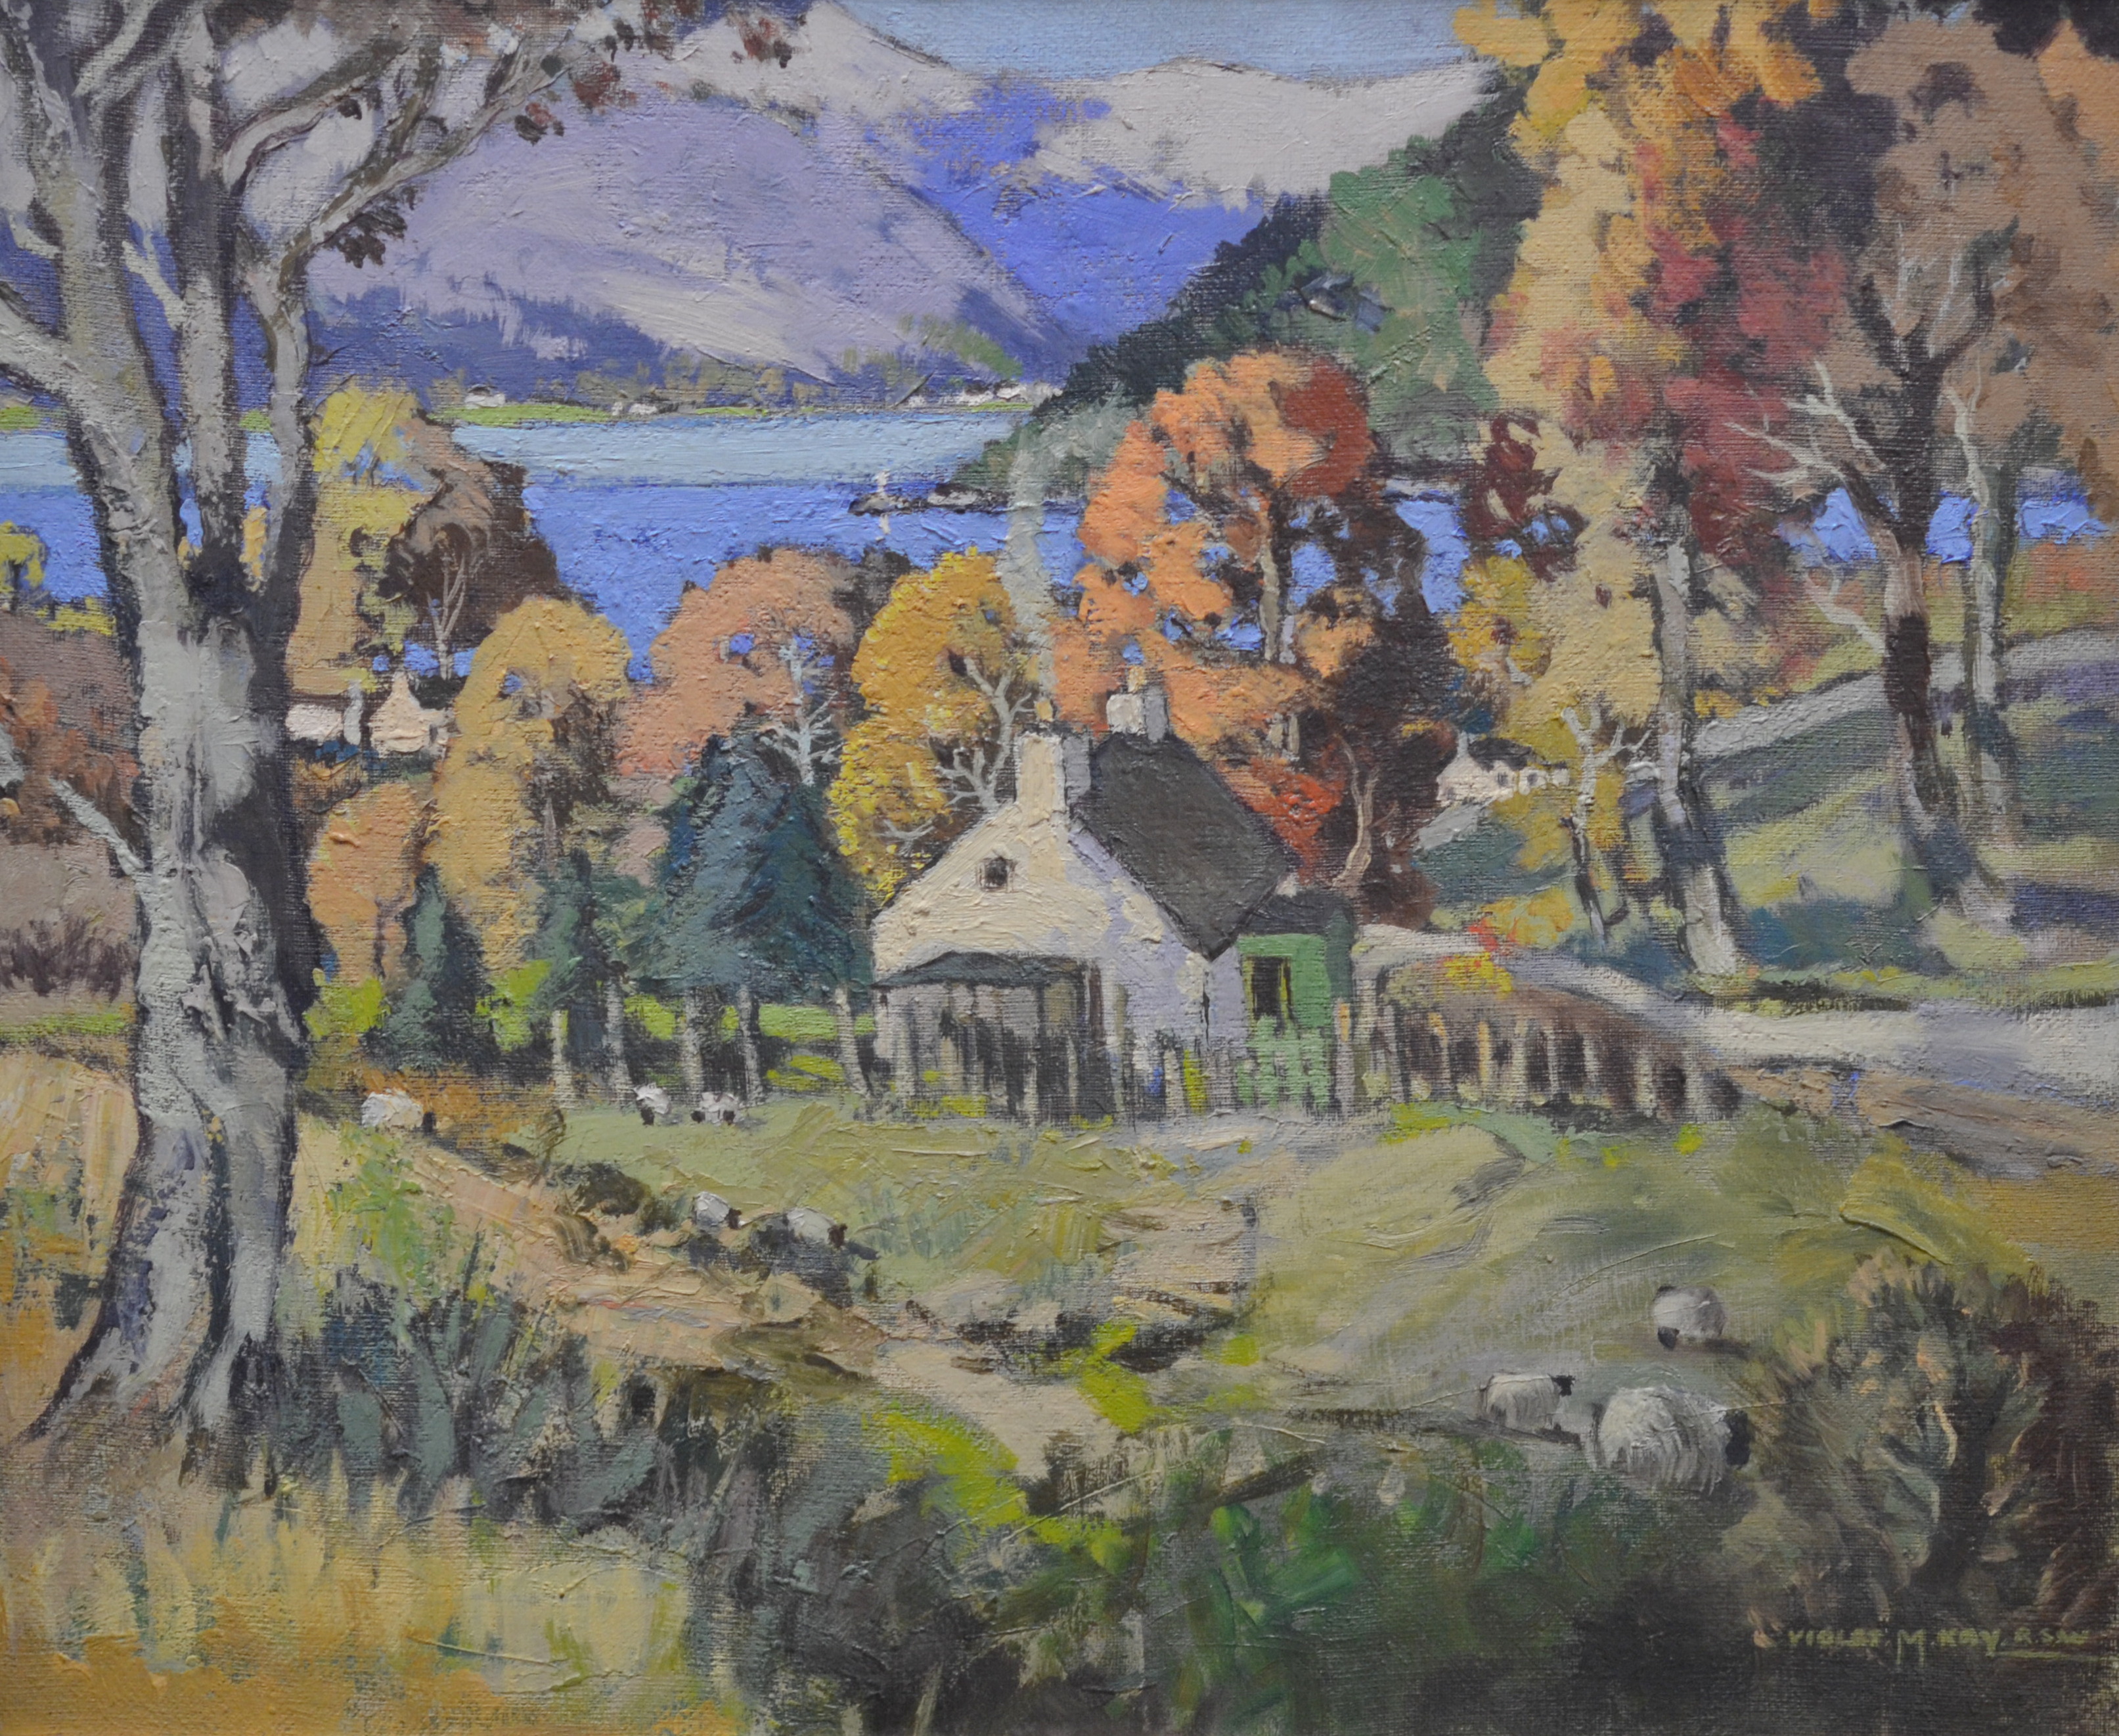 VIOLET MACNEISH KAY RSW (1914-1971) - 'Loch Long and Loch Goil from Portincaple', oil on board, - Image 2 of 2